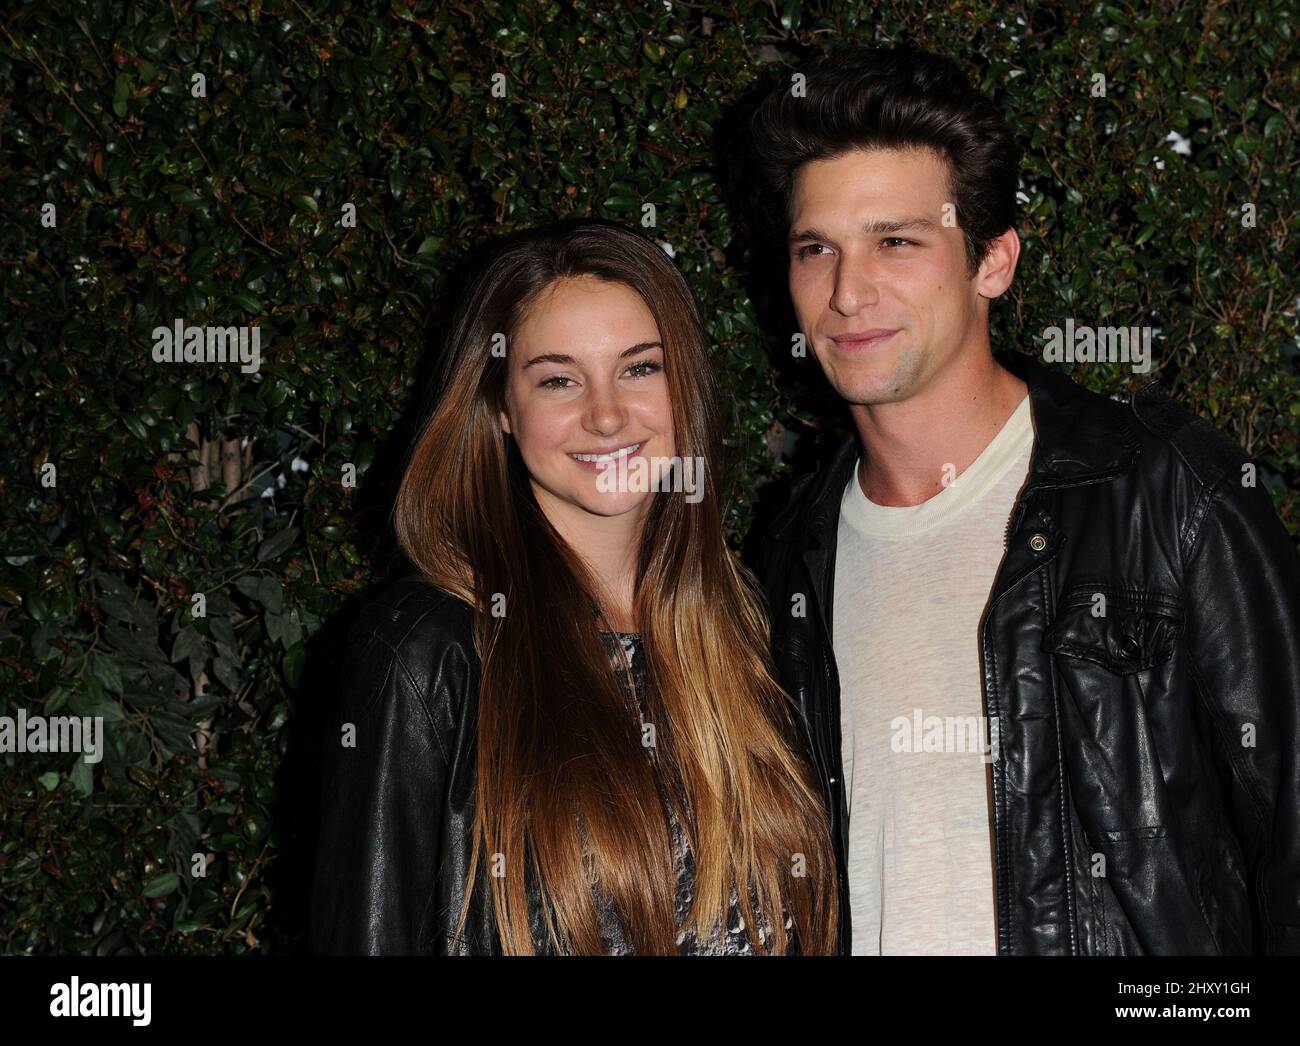 Shailene Woodley and Daren Kagasoff during the ABC Family West Coast Upfronts held at The Sayers Club, California Stock Photo